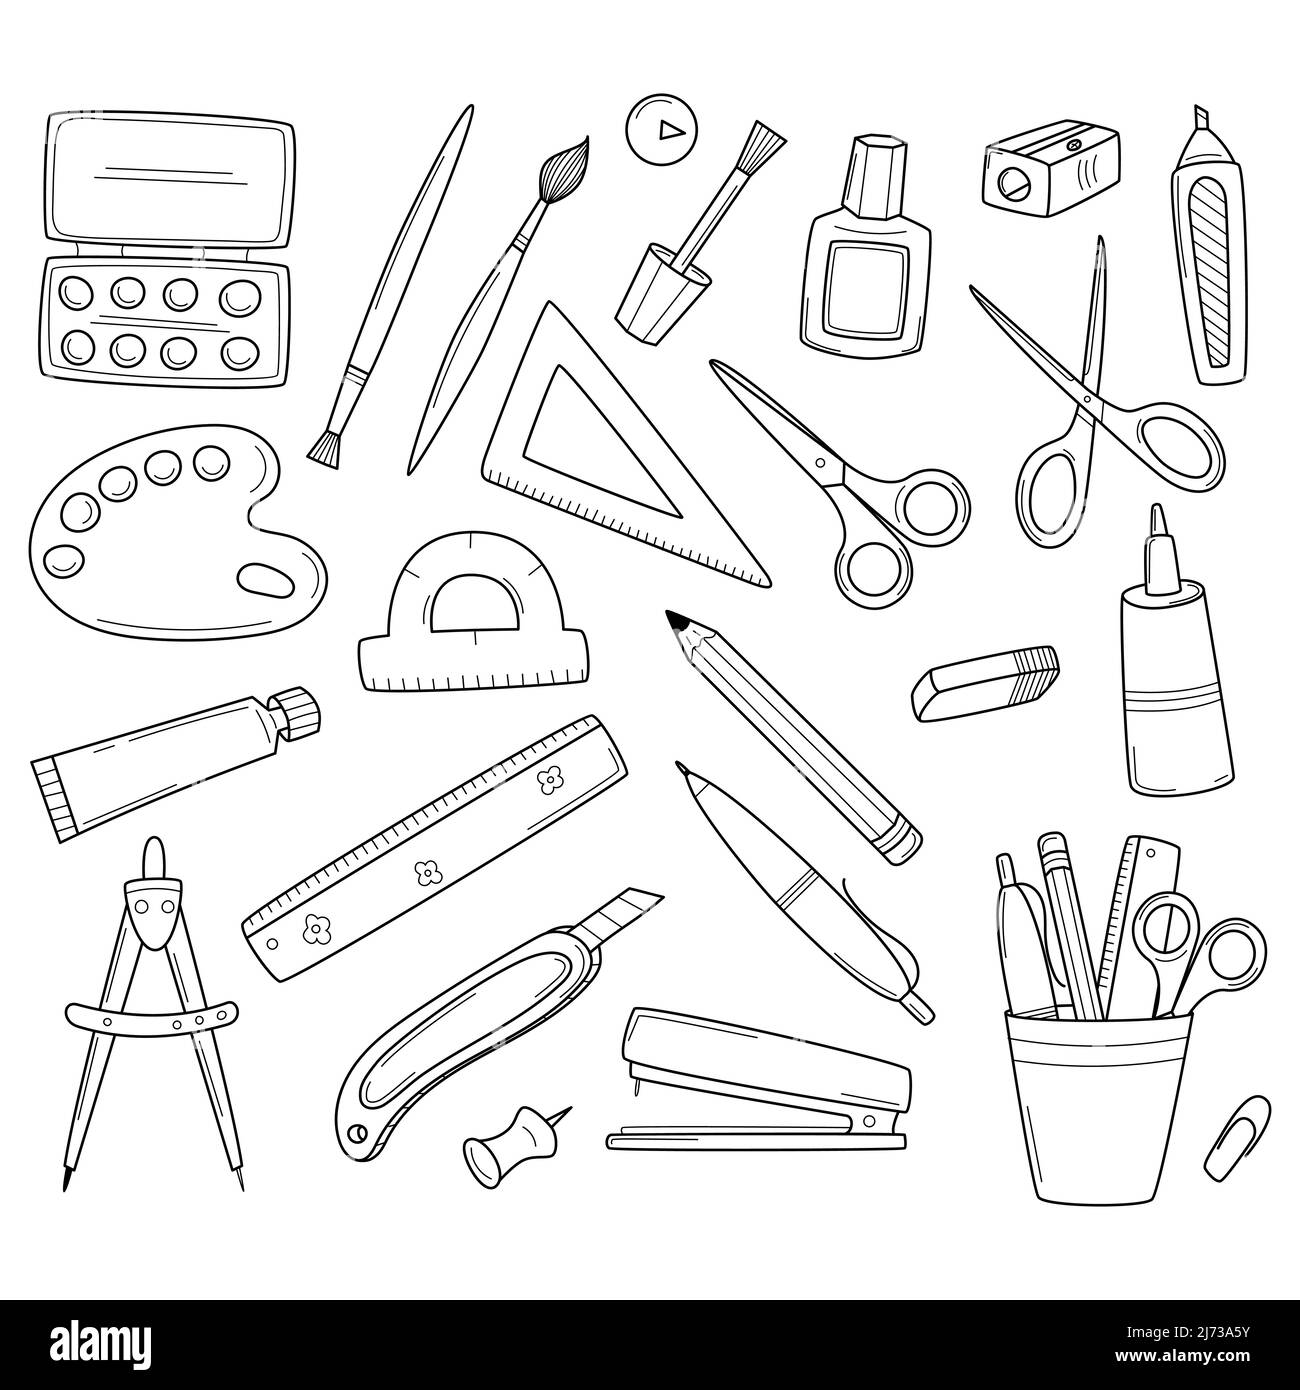 Hand Drawn Vector Doodle Illustration of Art Supplies. Stock